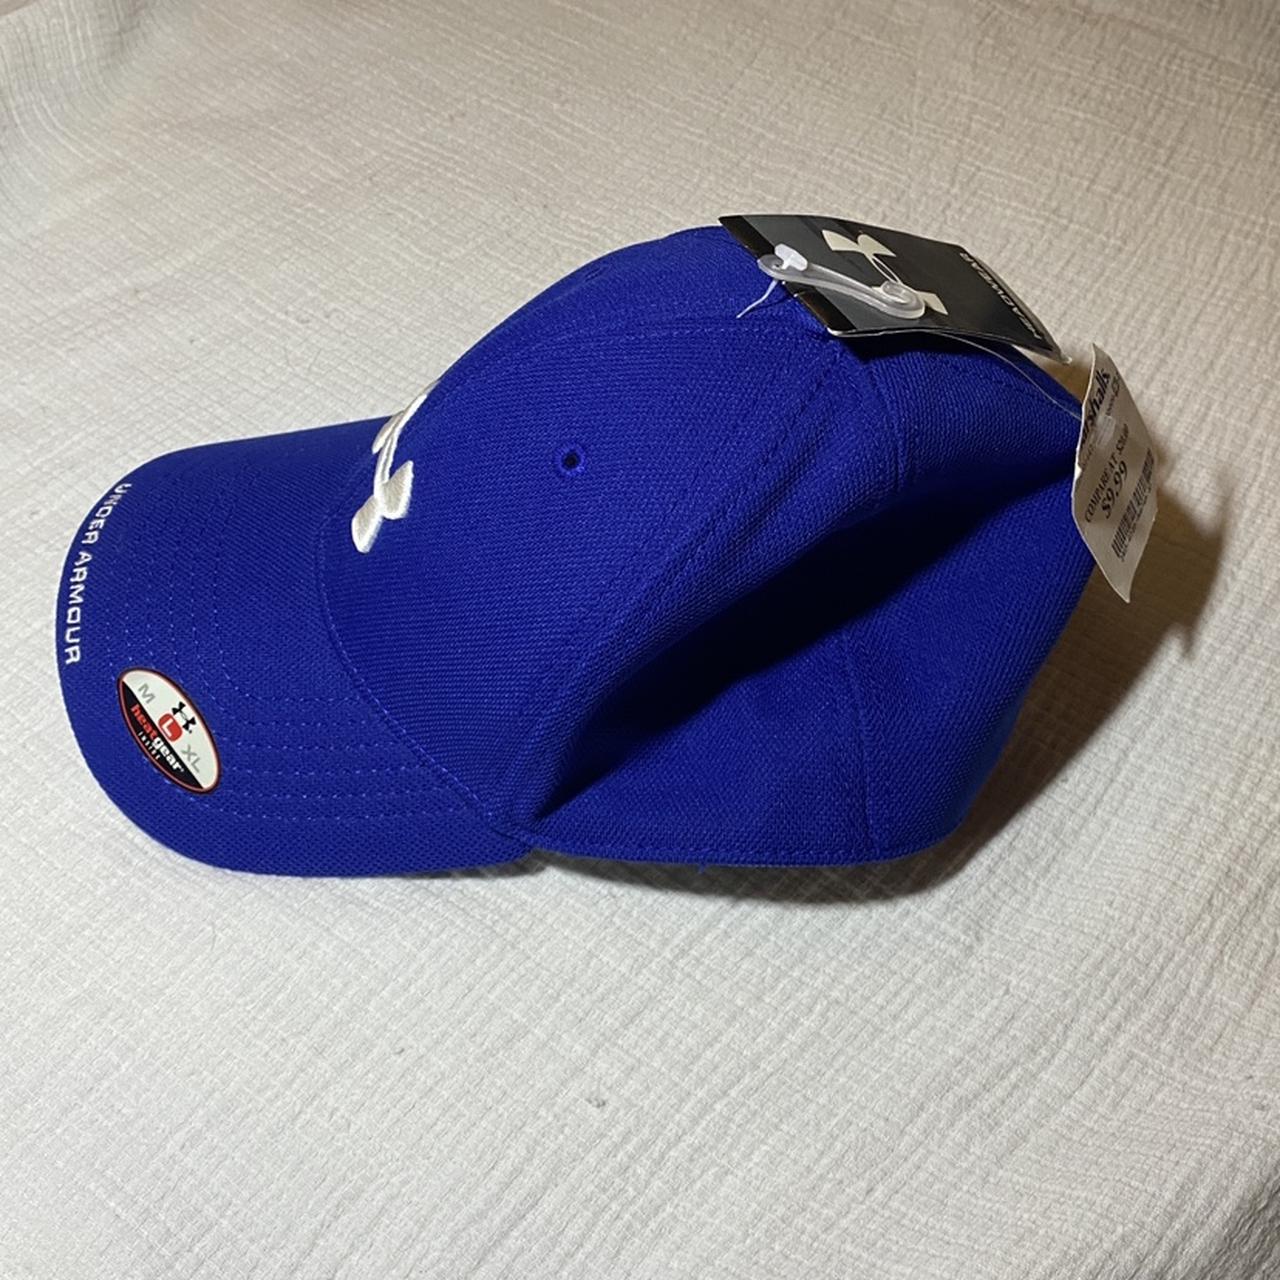 Under Armour cap No stains, brand new $4 shipping - Depop